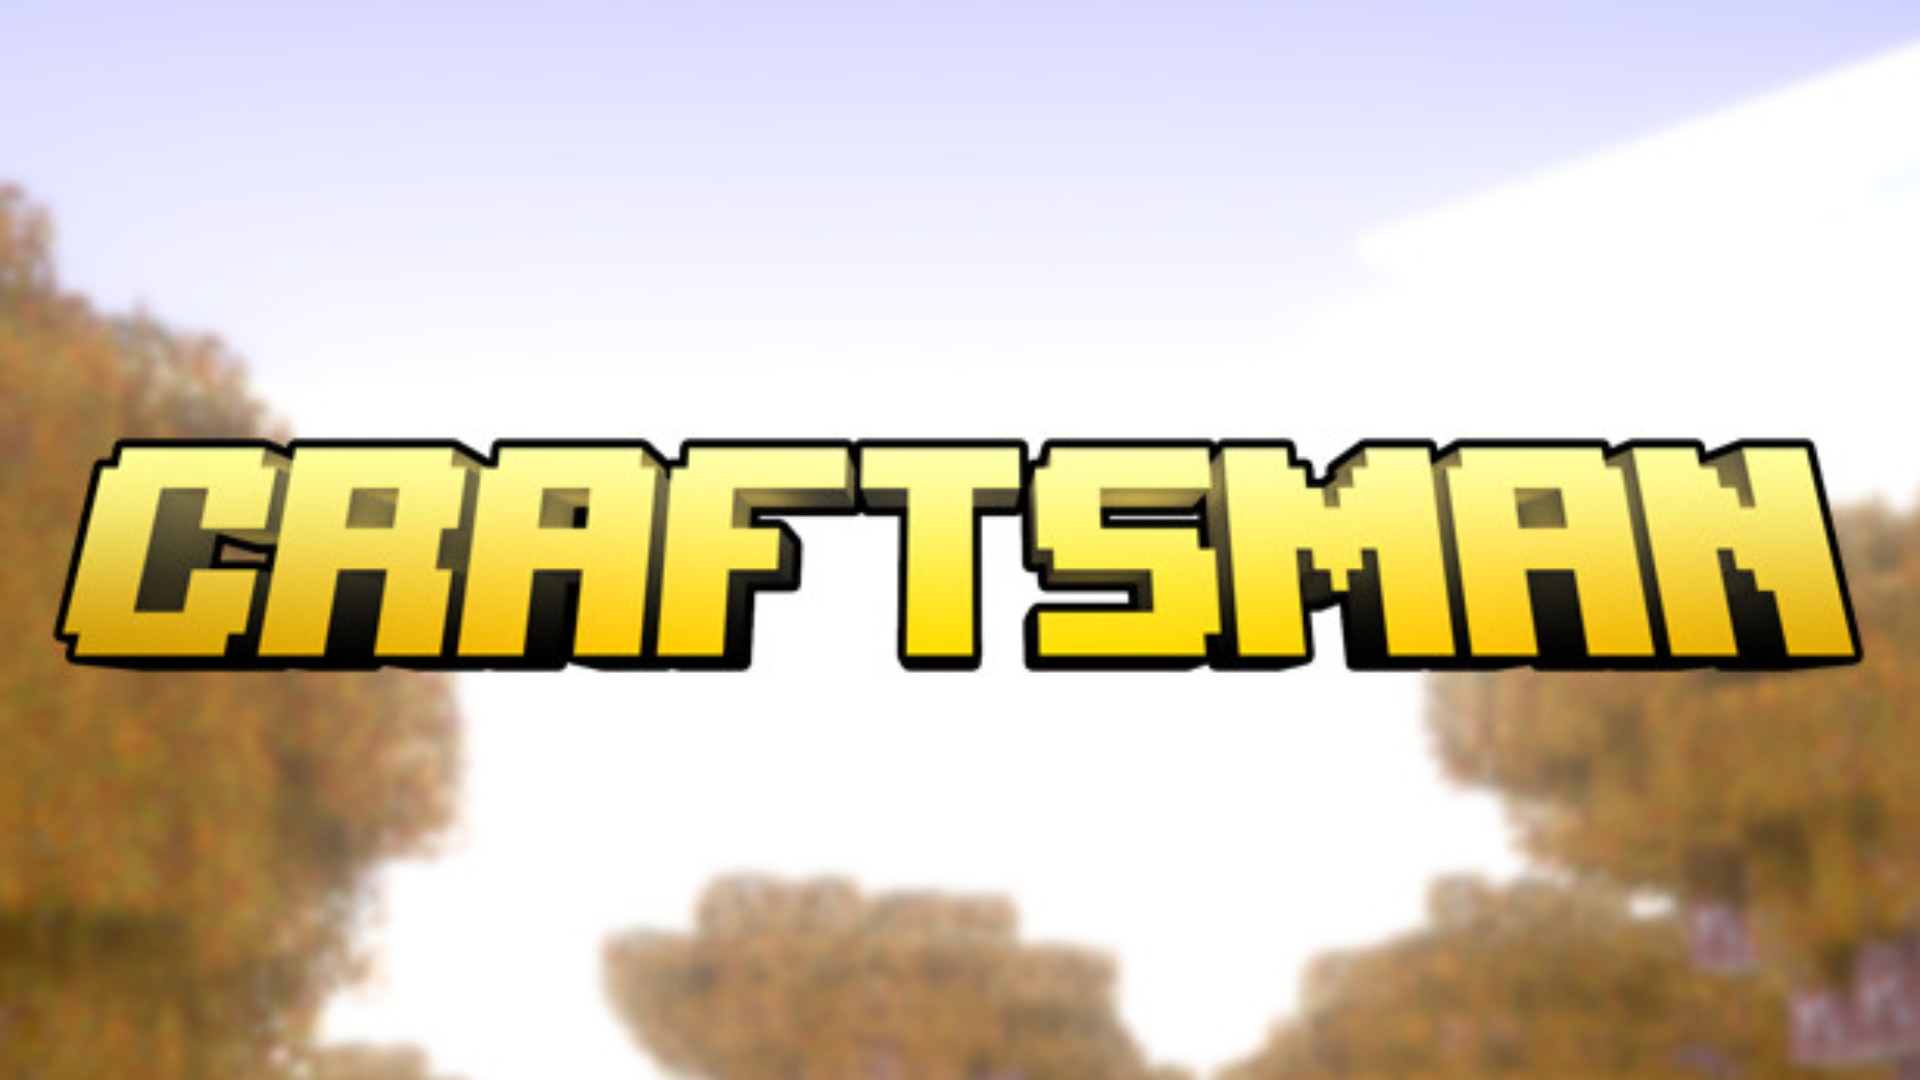 Craftsman: The Ultimate Crafting and Building Experience